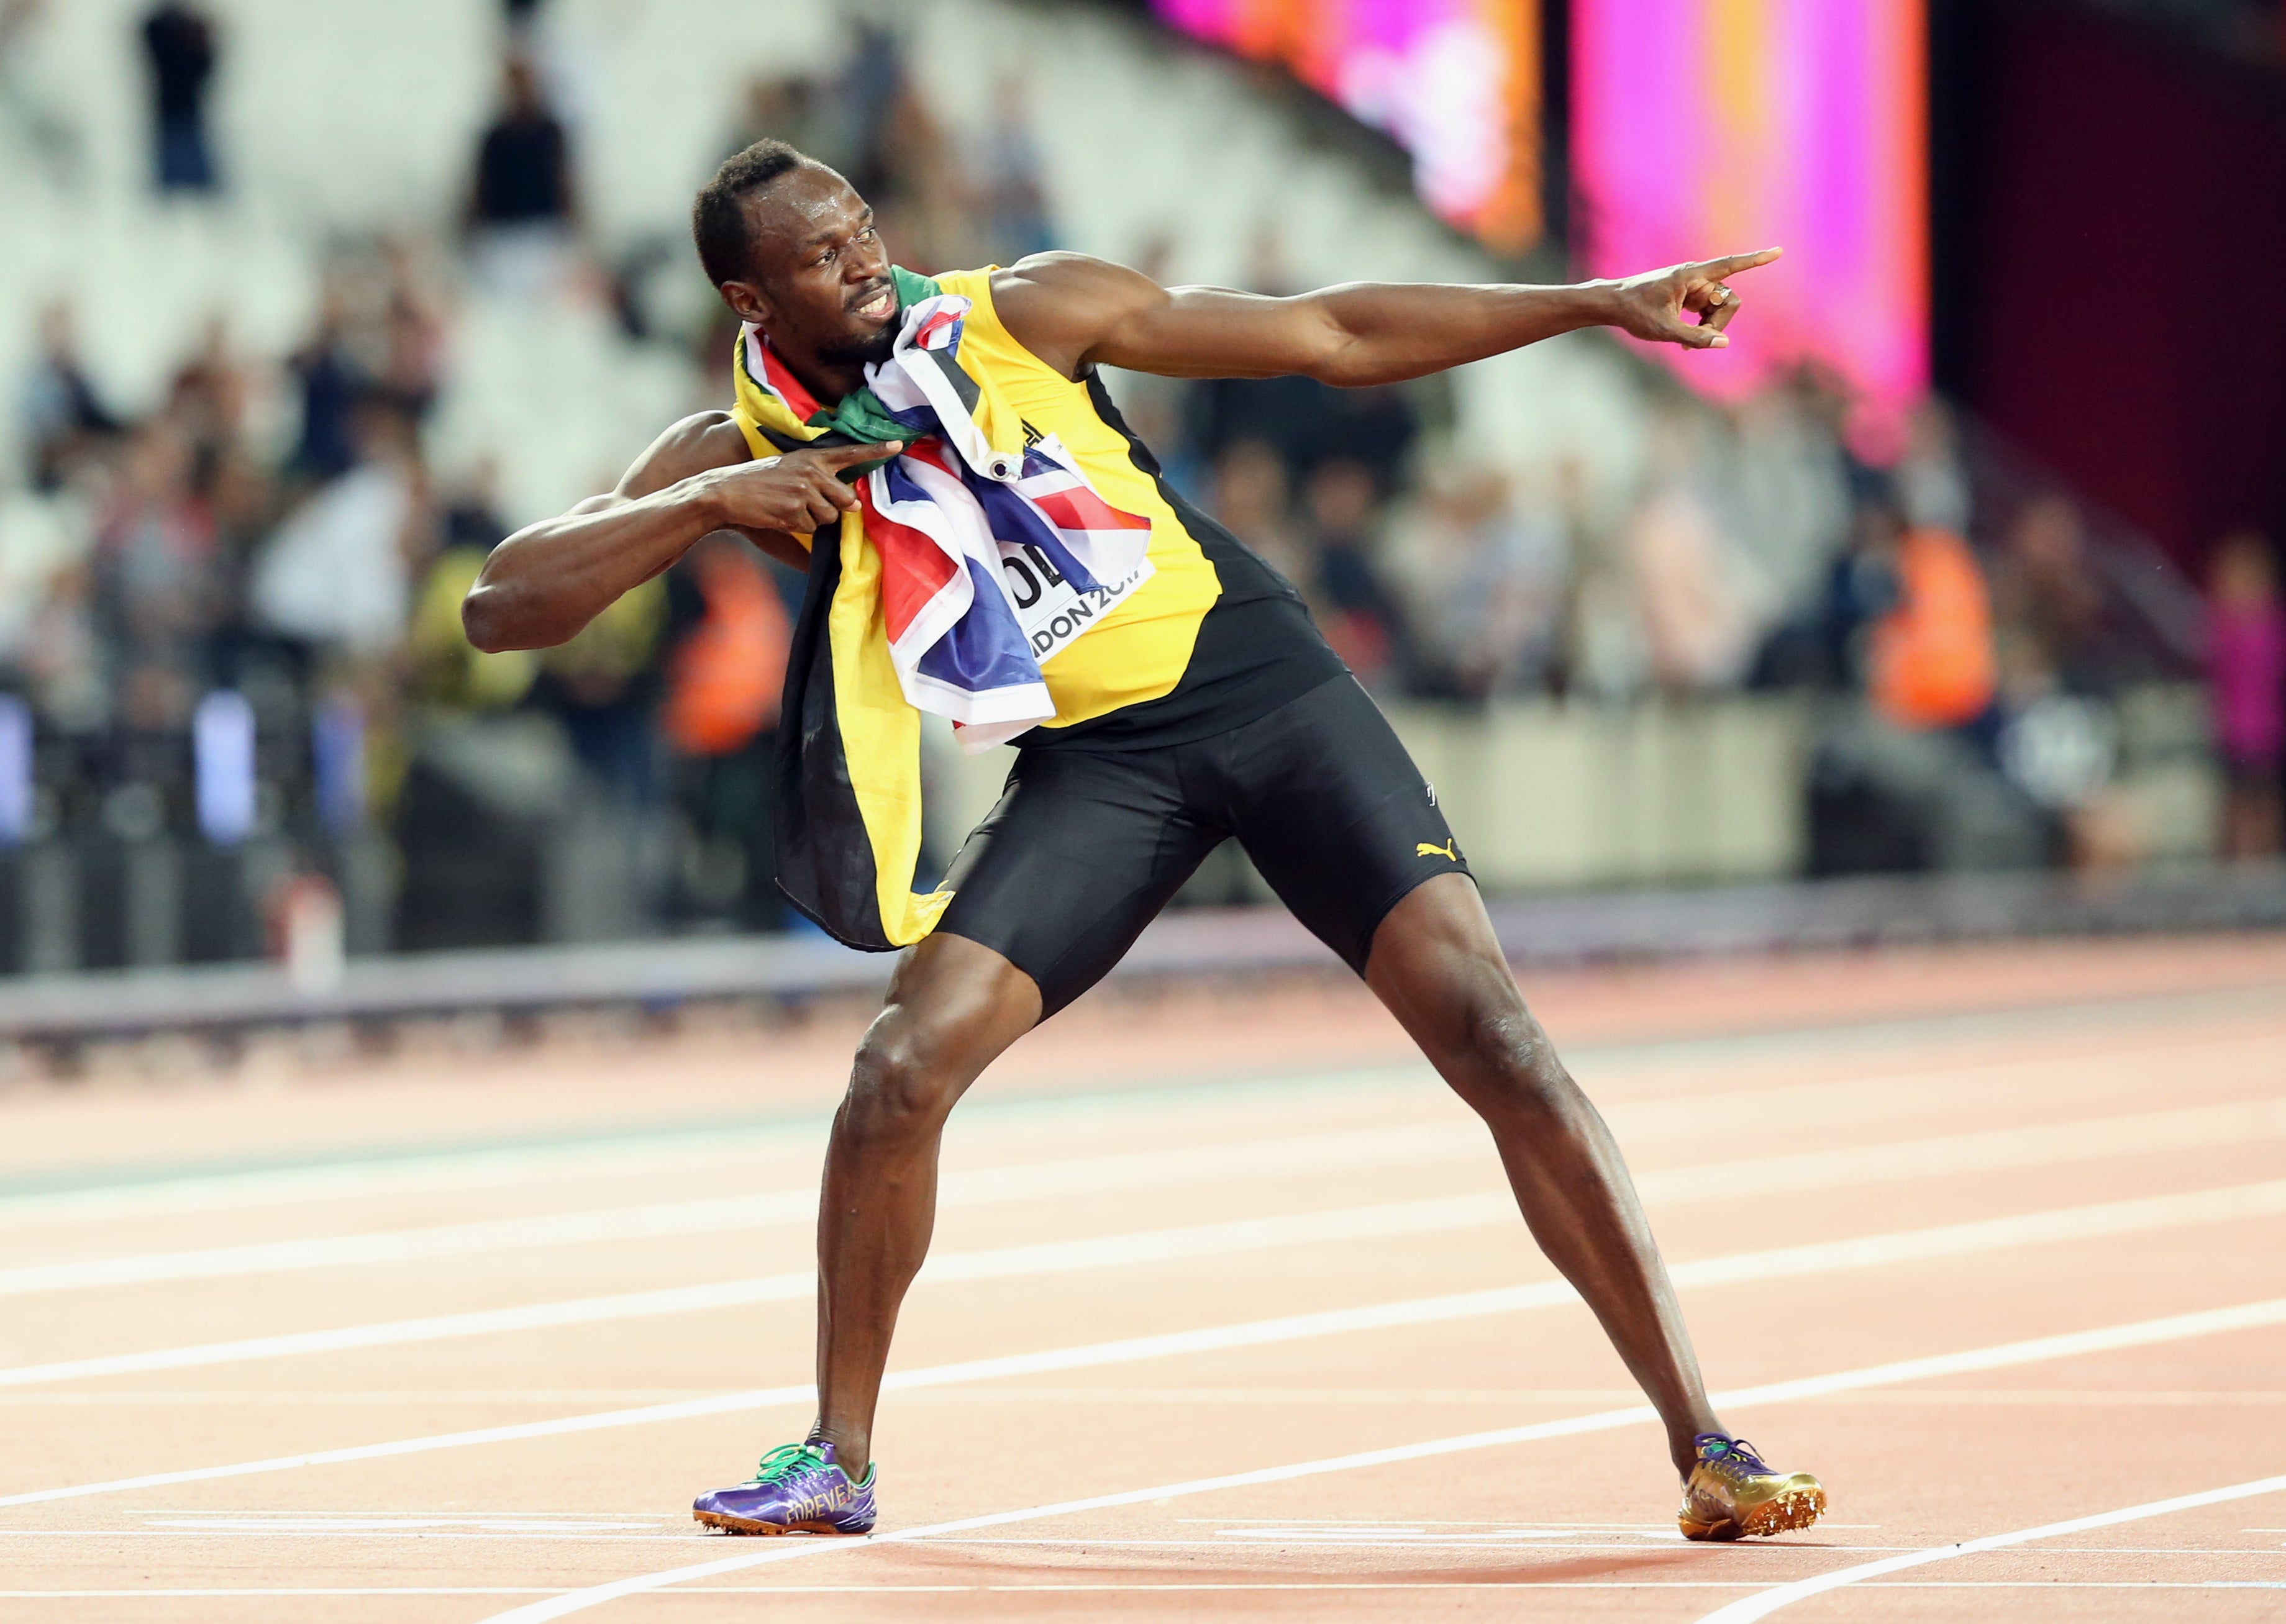 Usain Bolt Files for Trademarks to Protect His Victory Pose - Bloomberg